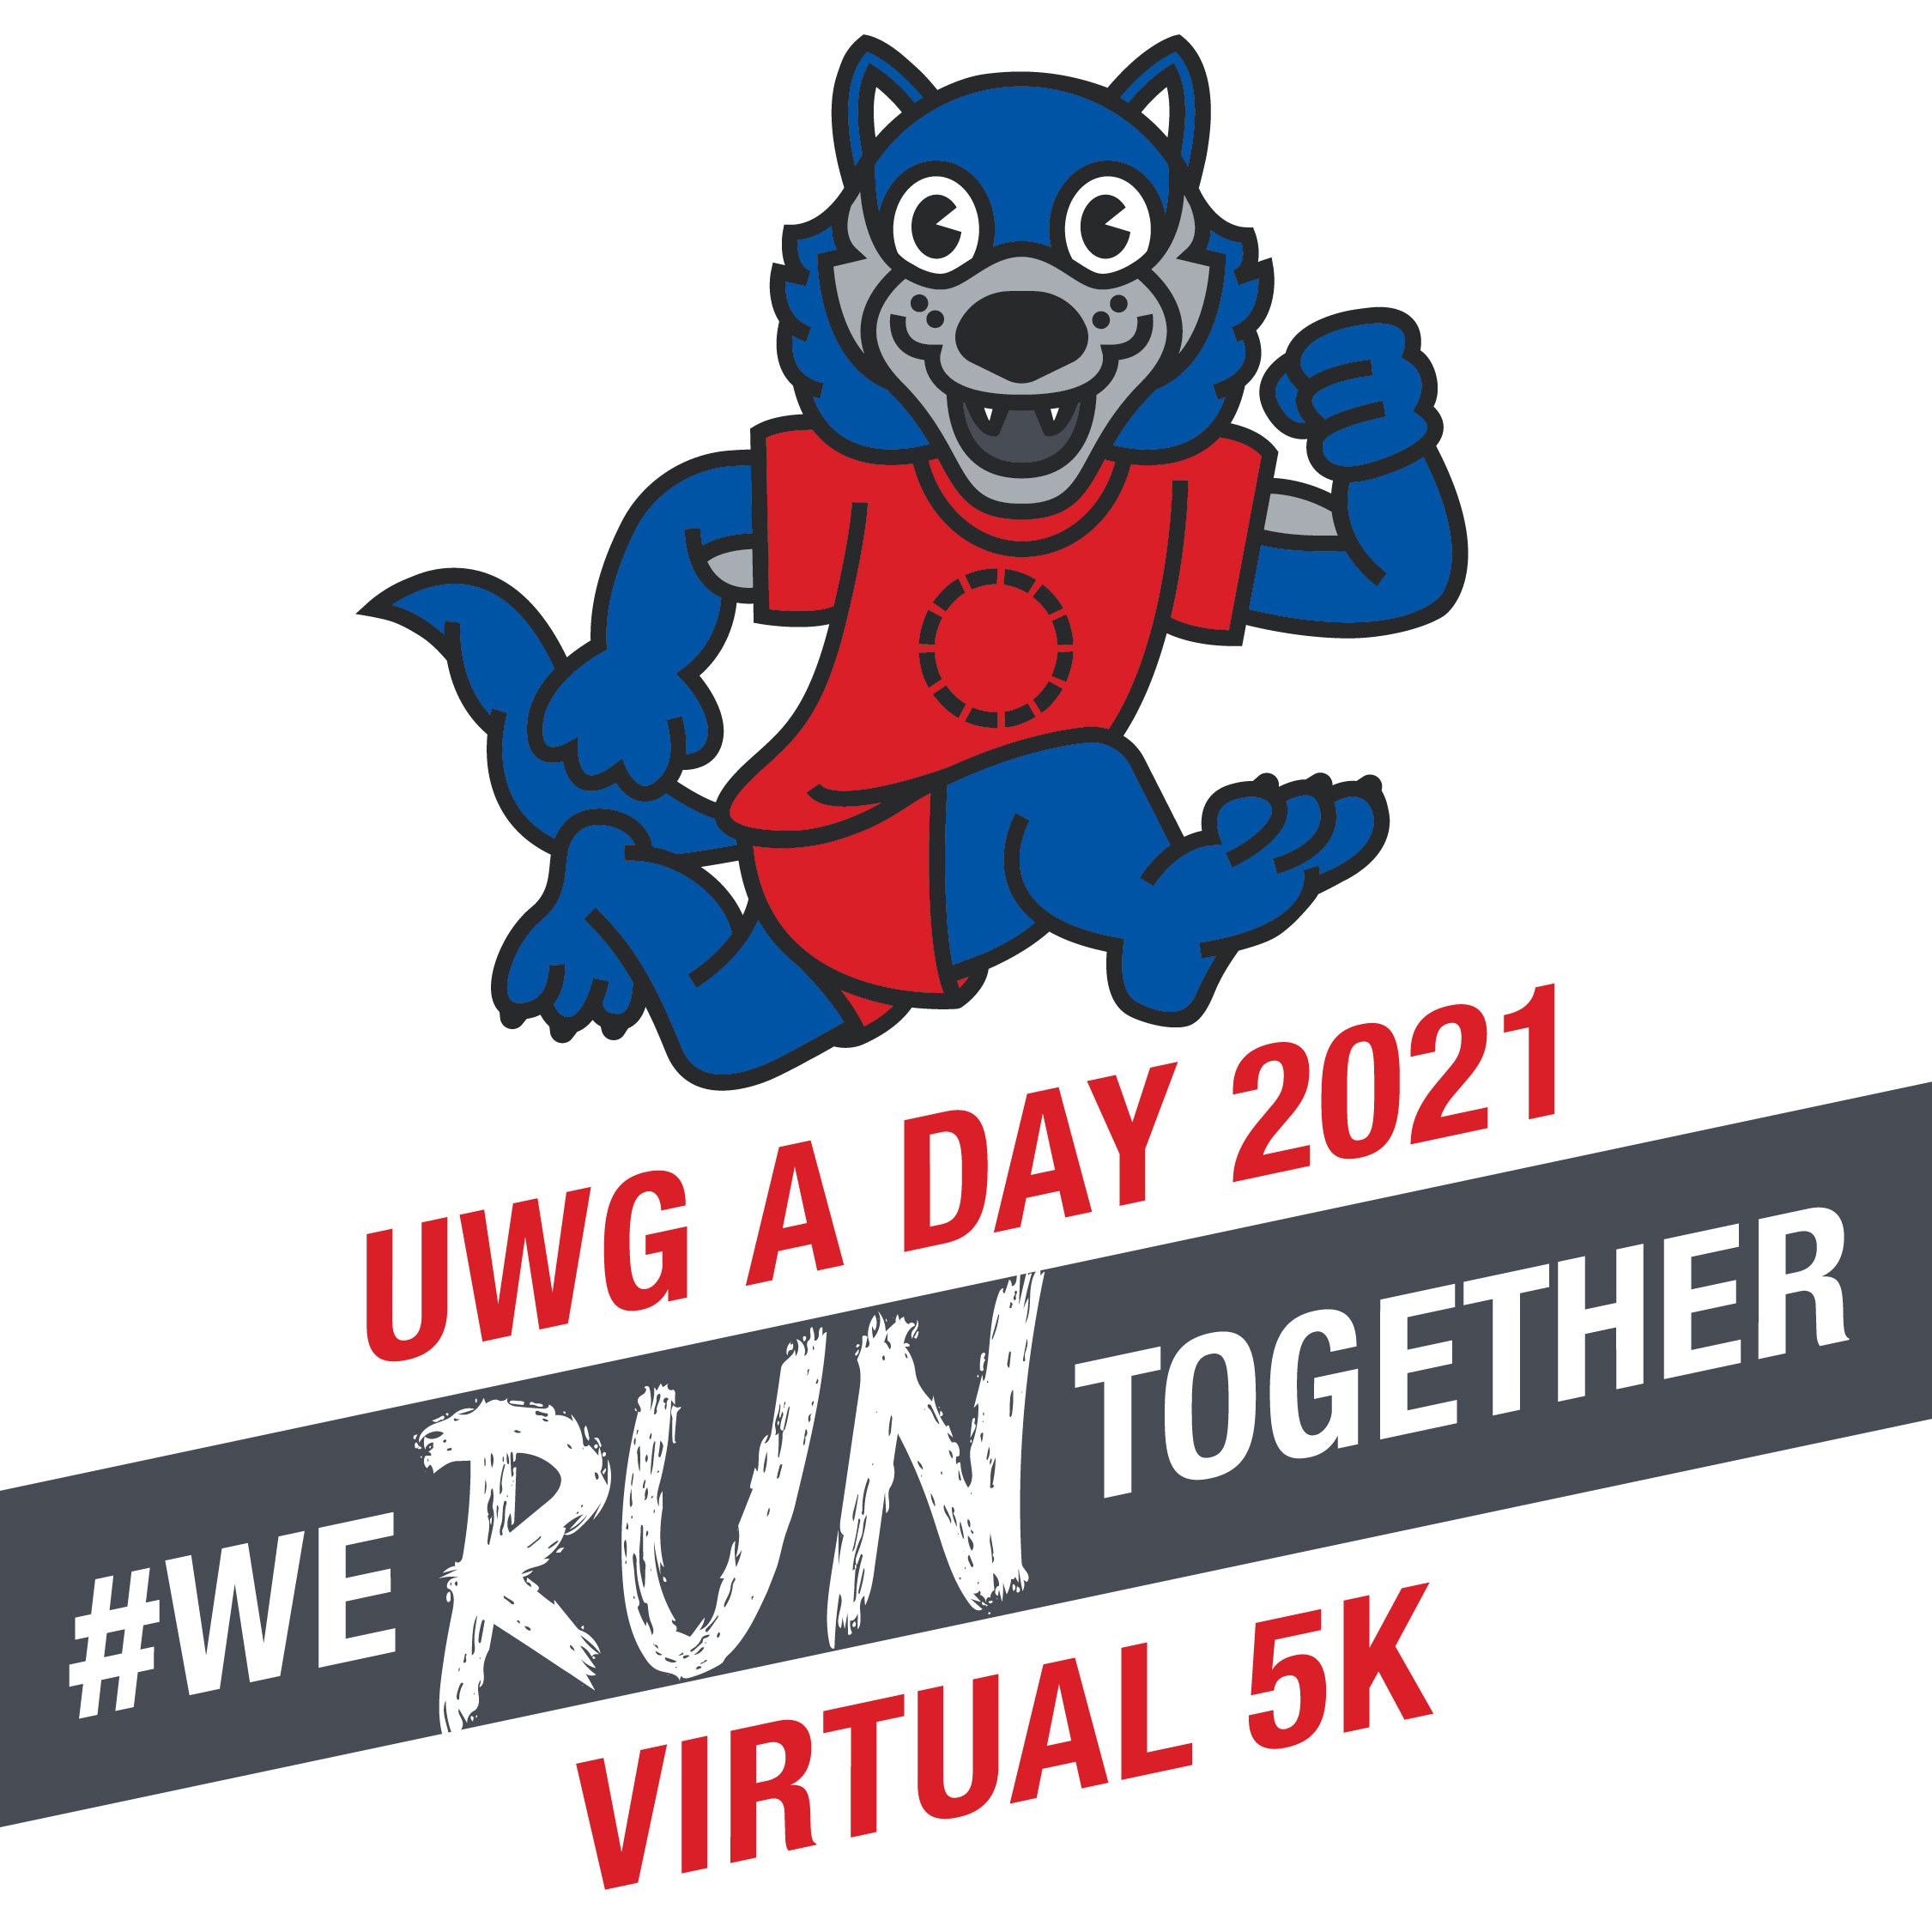 A Day virtual 5K with Wolfie